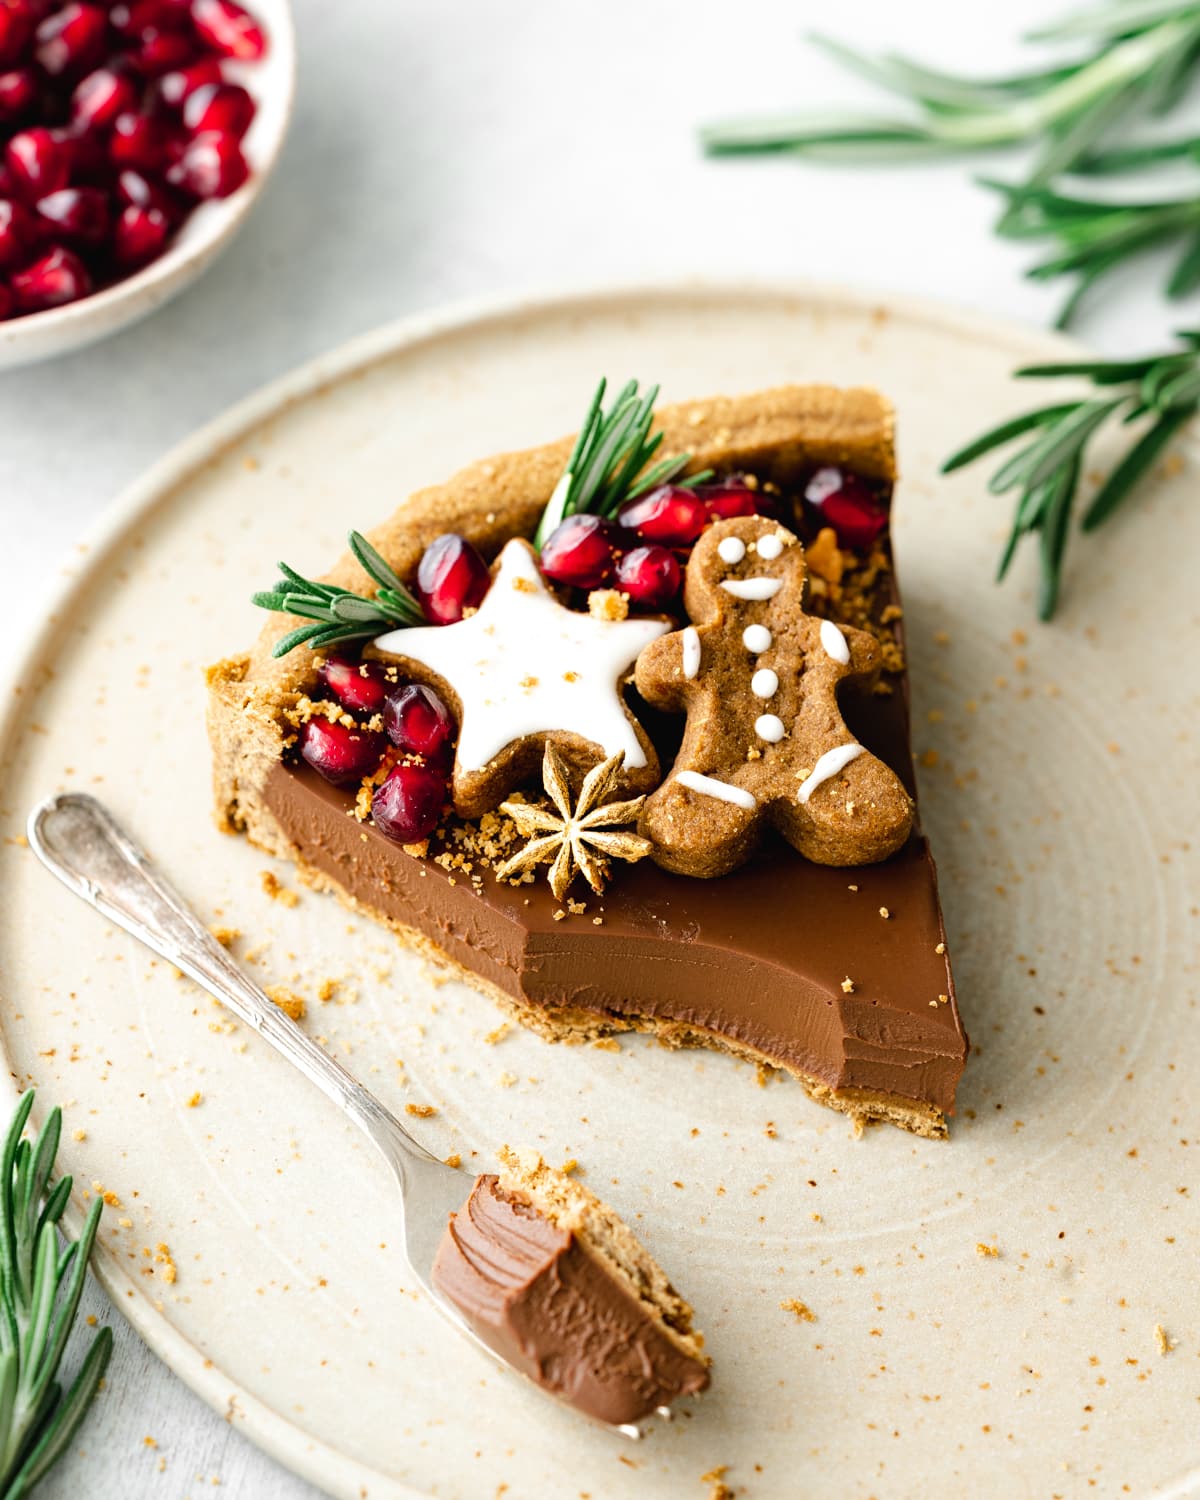 slice of chocolate tart with gingerbread cookies and pomegranate seeds on top.